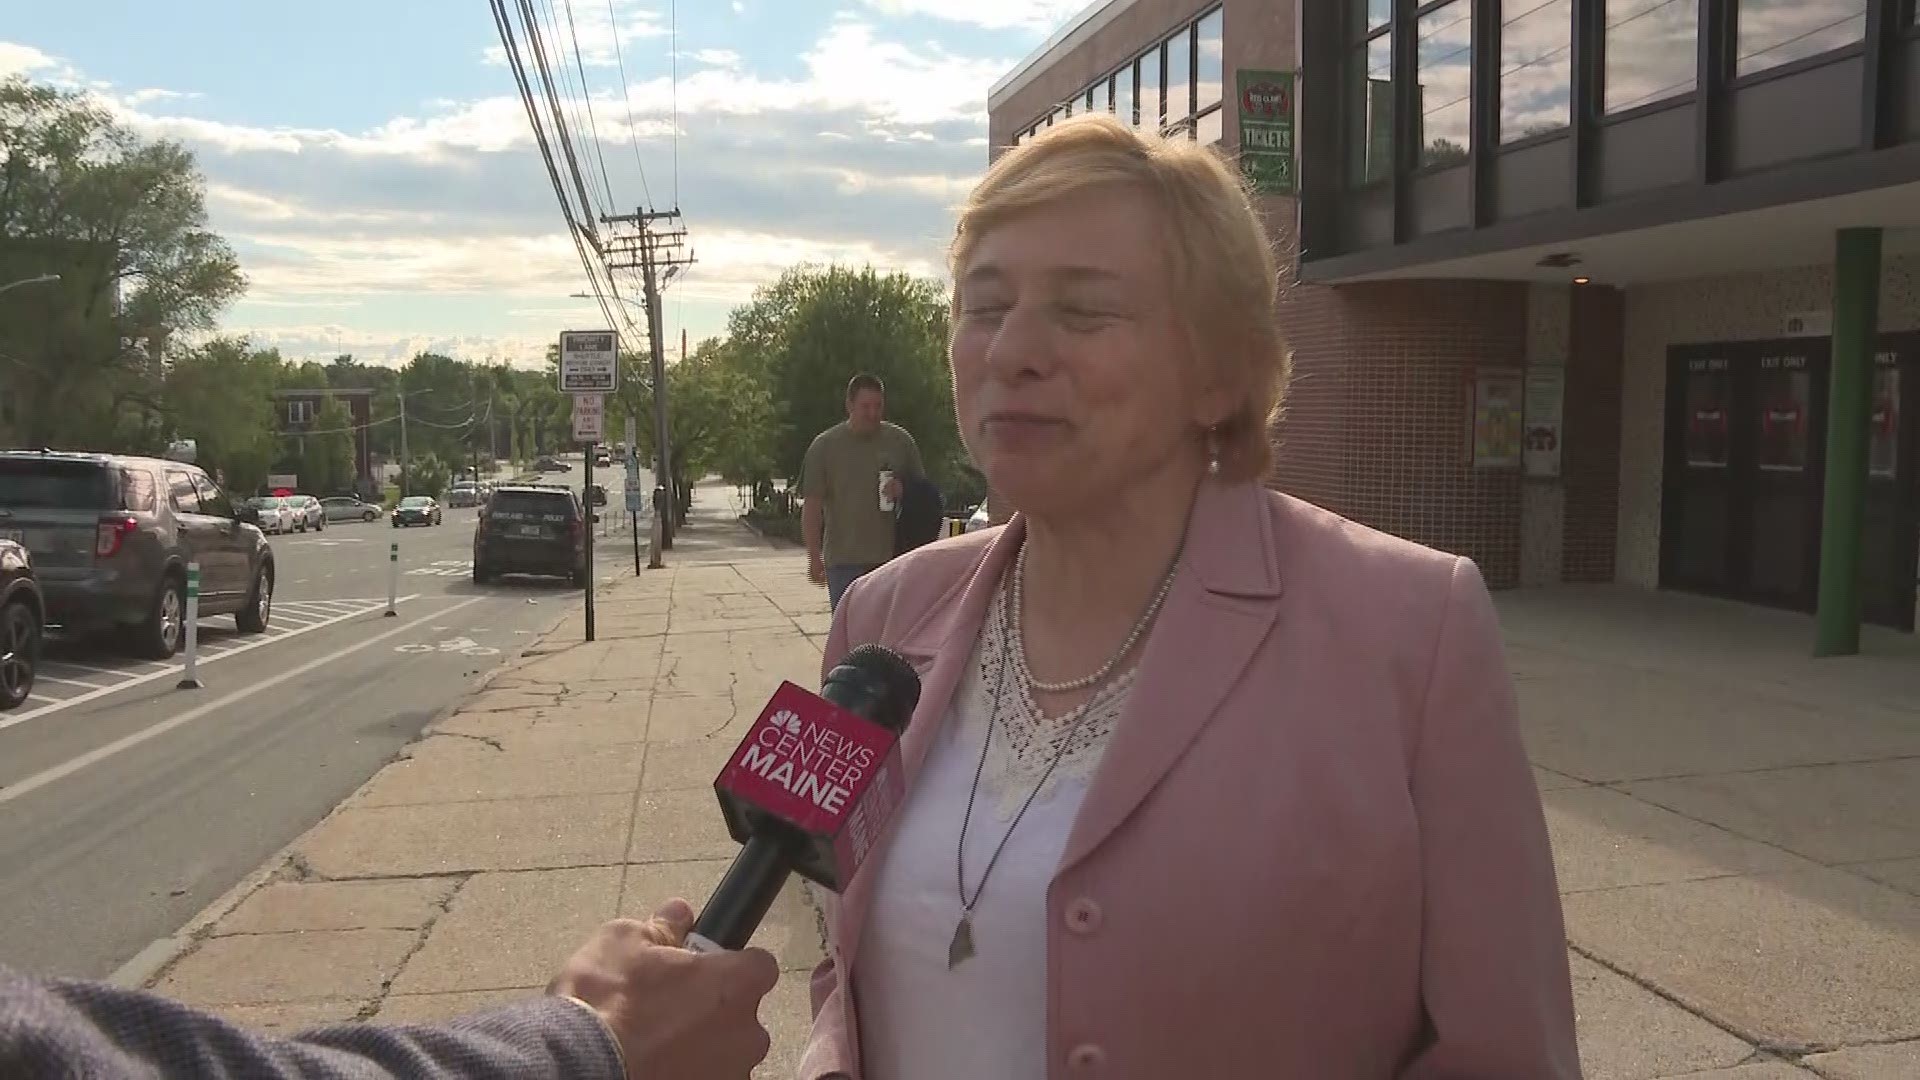 Gov. Janet Mills shared her take on the influx of asylum seekers to Portland.